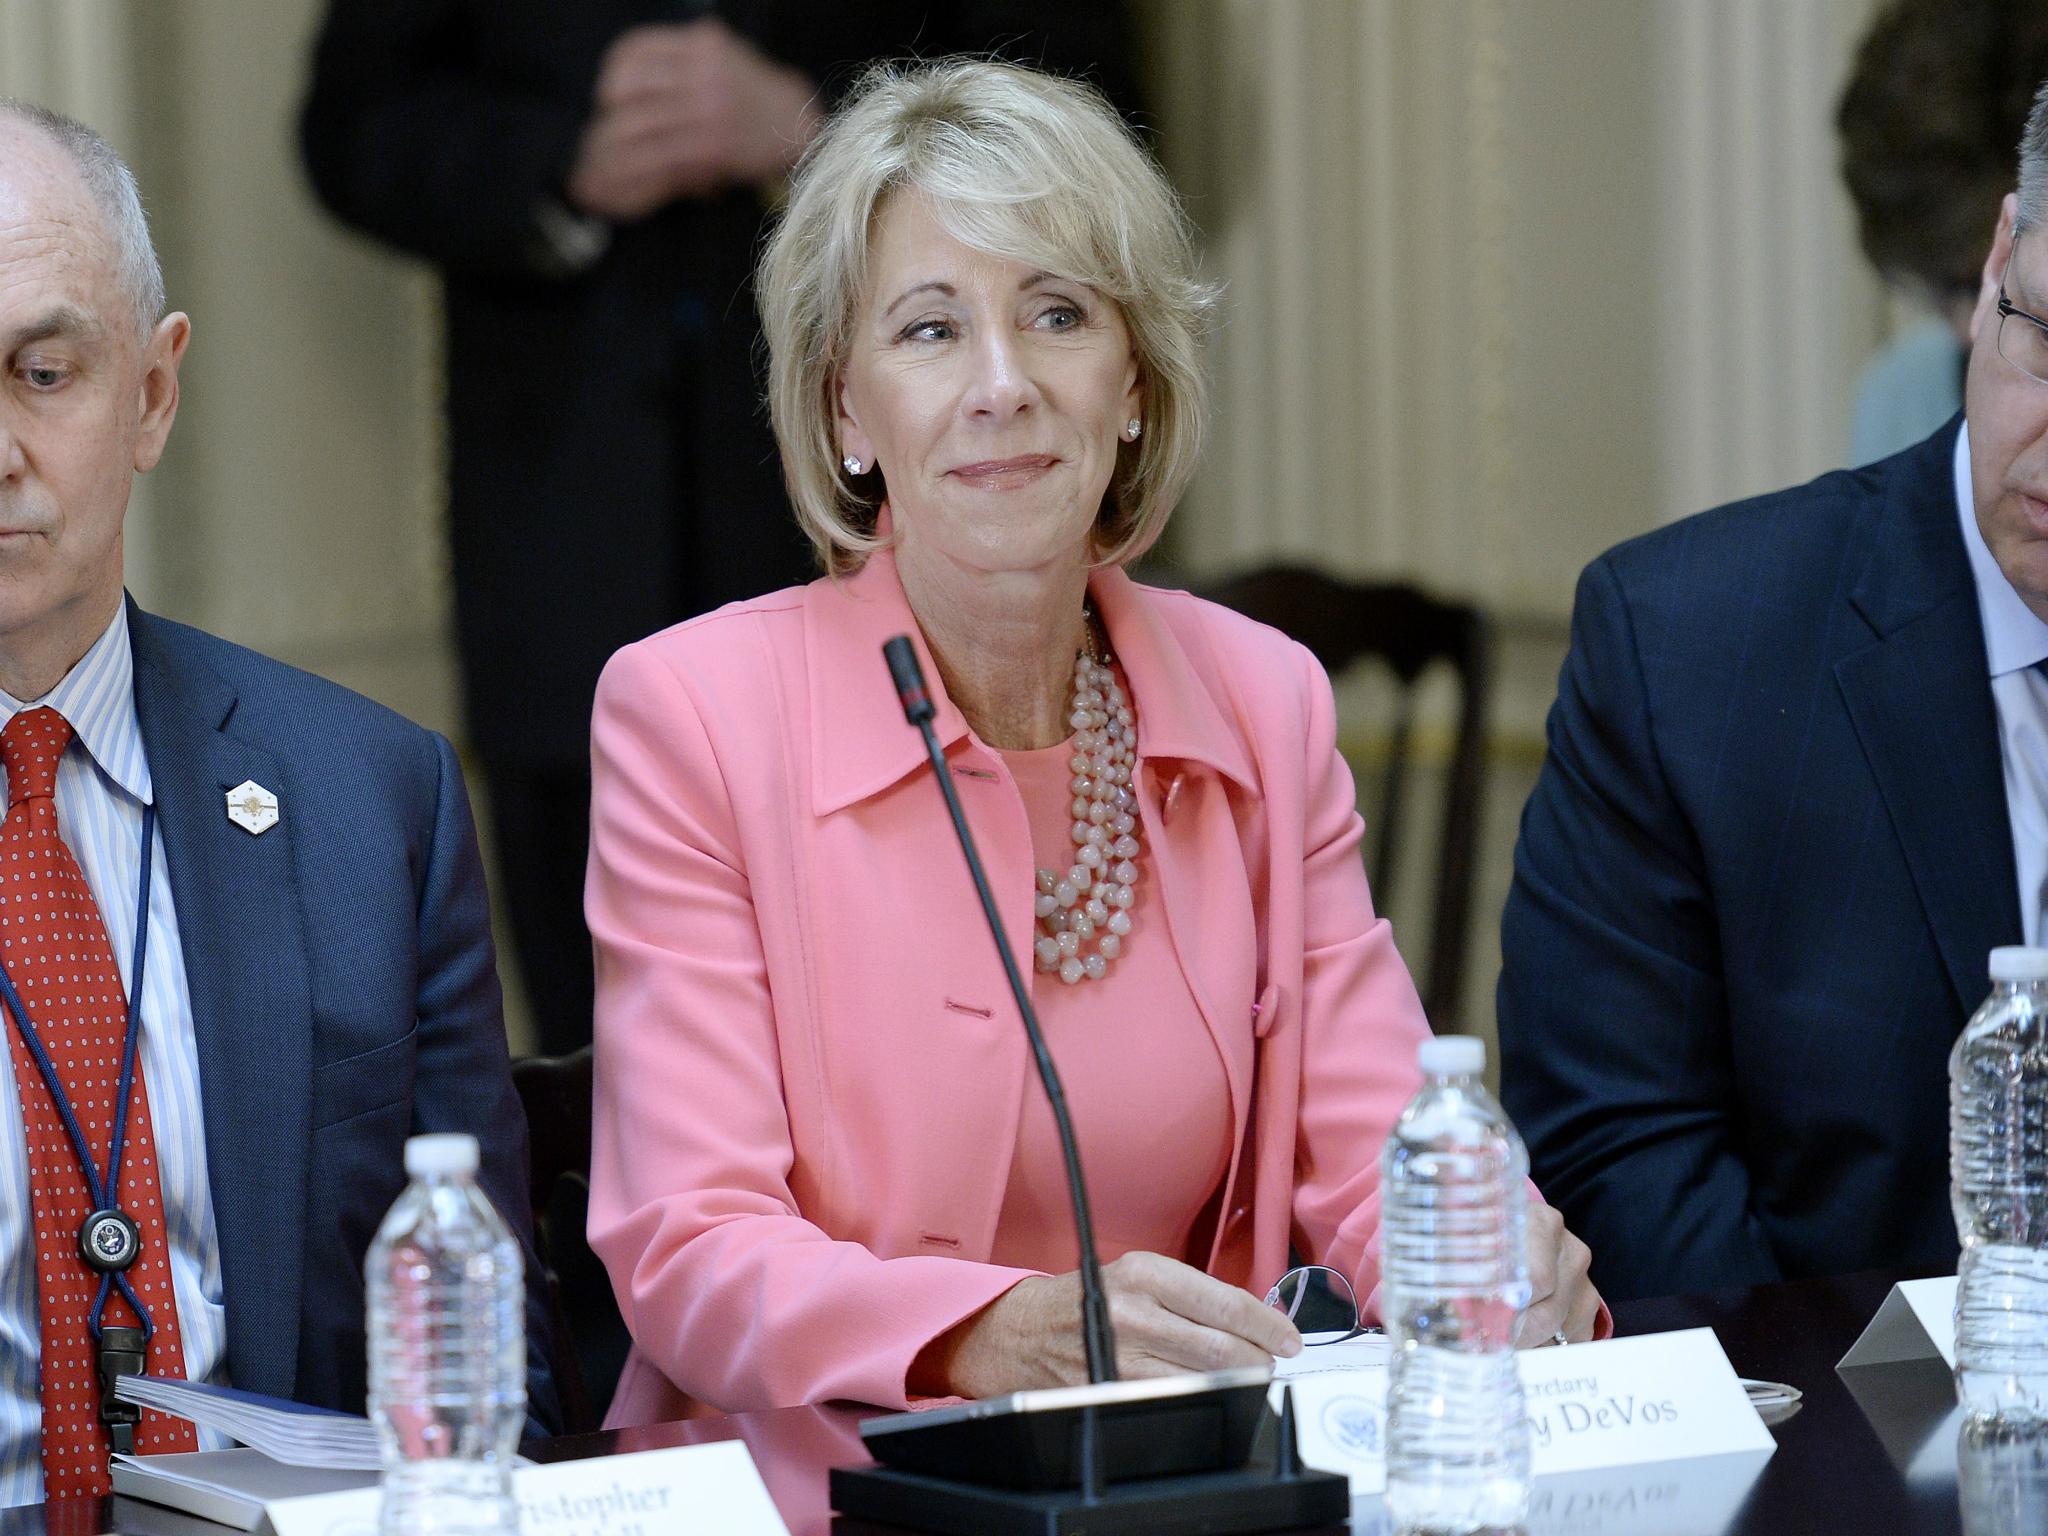 Betsy DeVos sought to divert billions to for-profit private schools